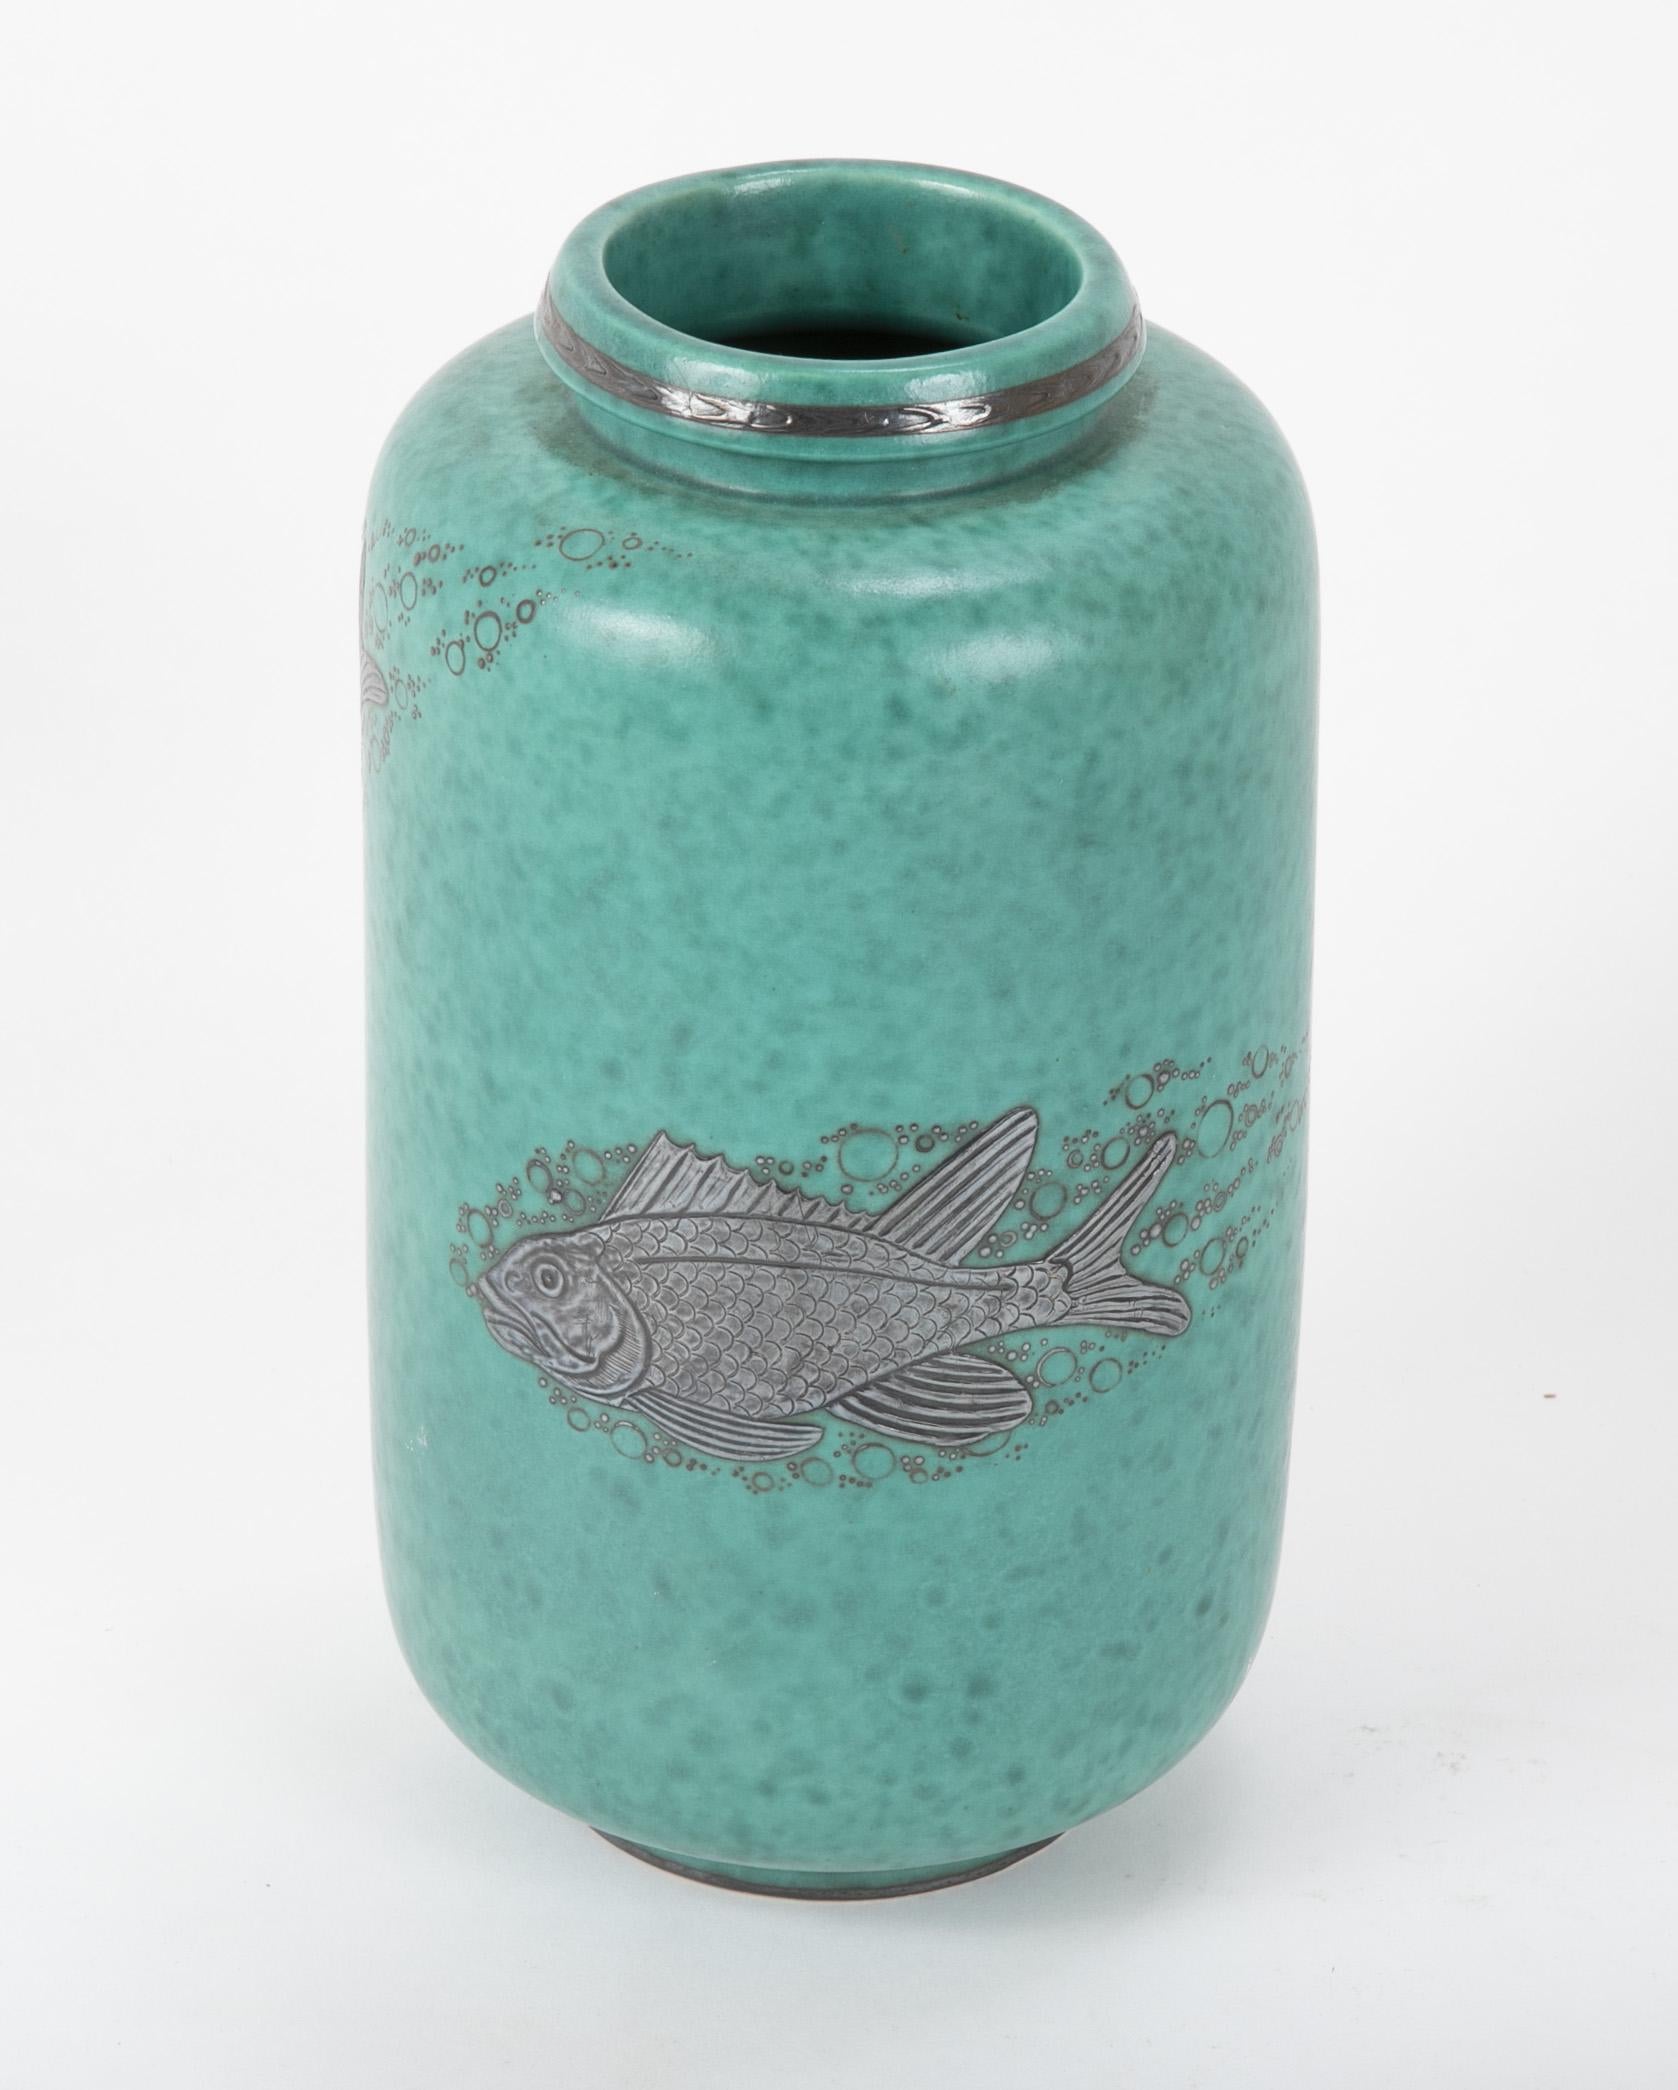 Art Deco glazed stoneware vase with swimming fish in silver overlay by Wihelm Kage for Gustavsberg, Sweden, 1930s.